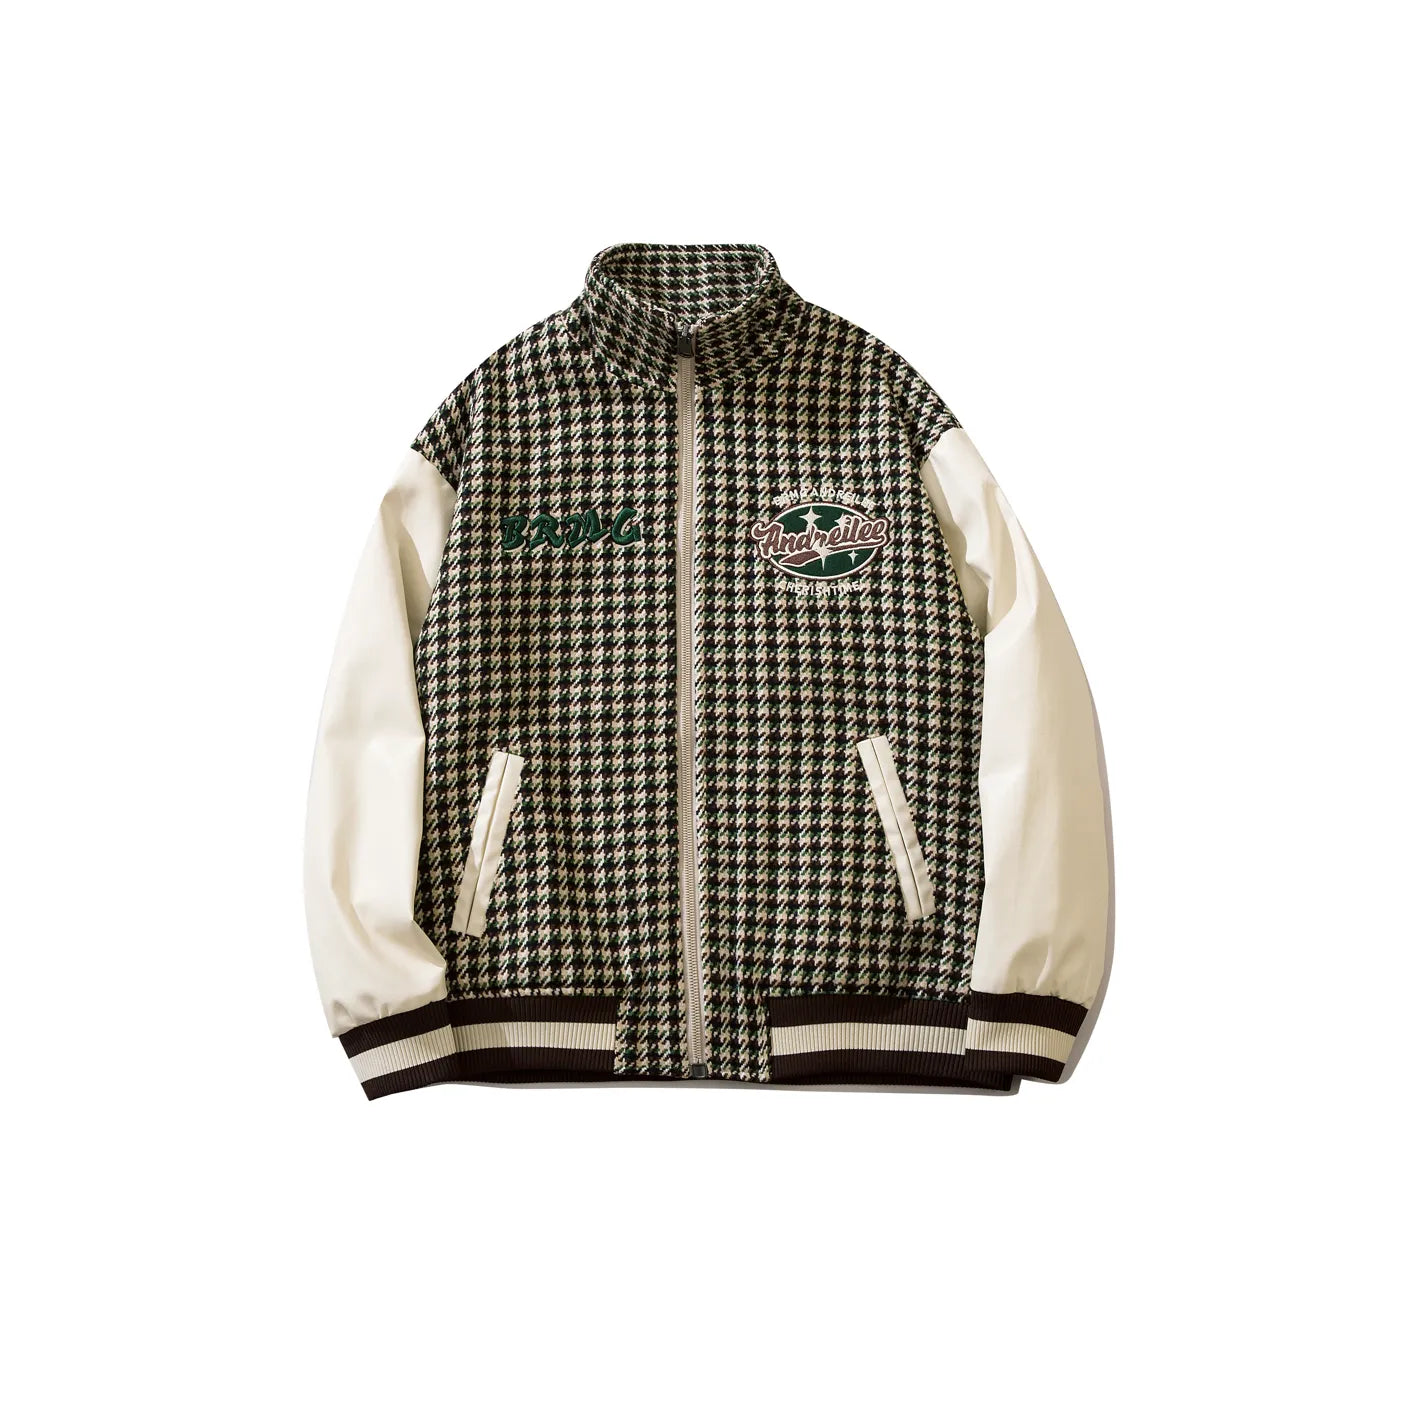 Houndstooth Baseball Jacket: Embroidered All-Match